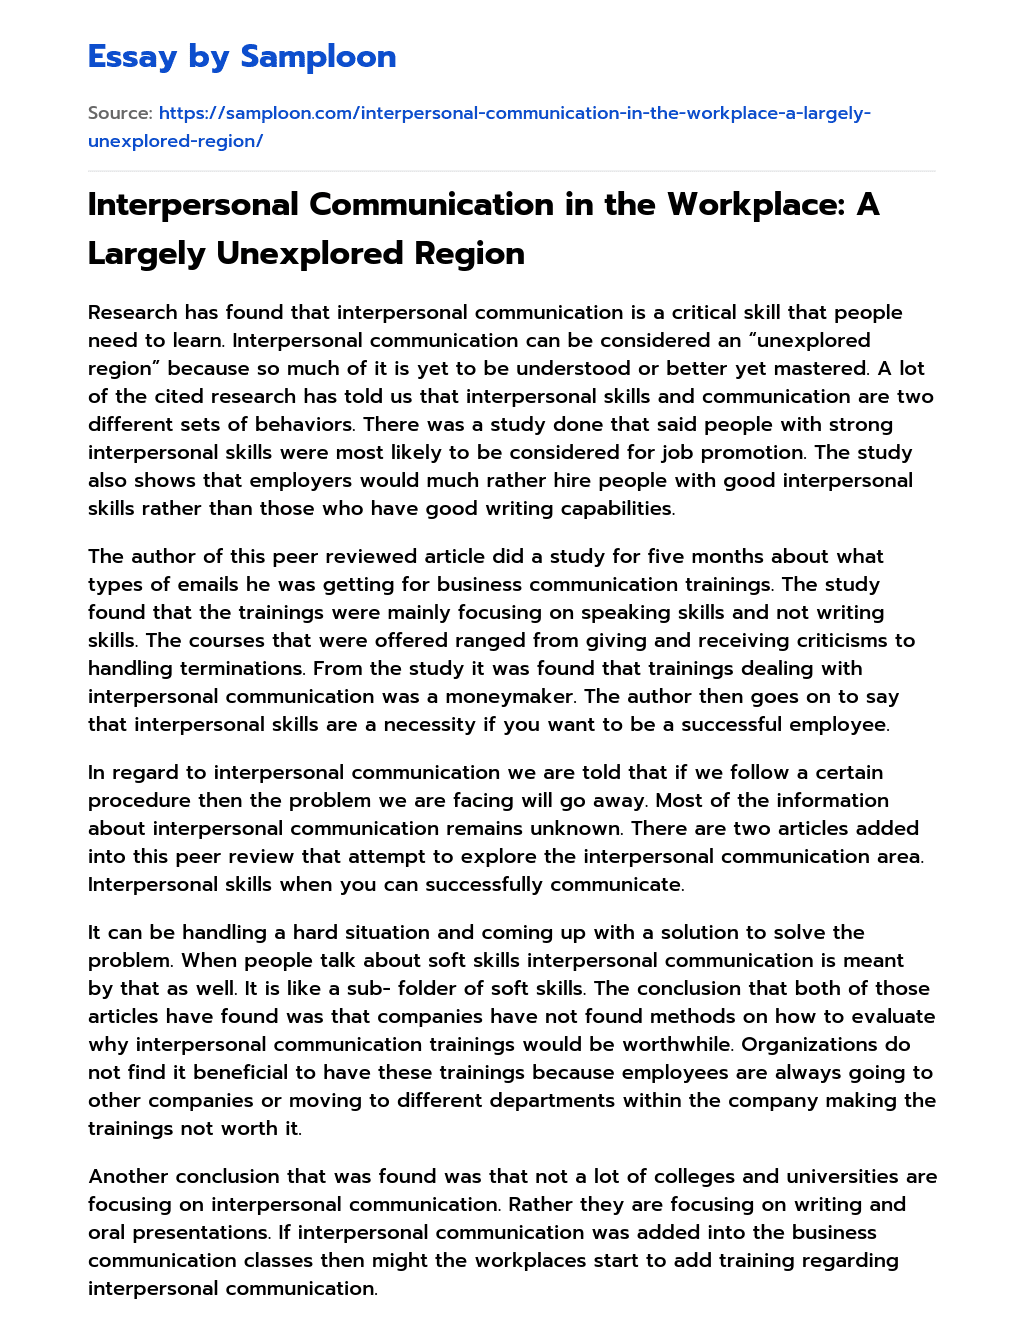 Interpersonal Communication in the Workplace: A Largely Unexplored Region Personal Essay essay